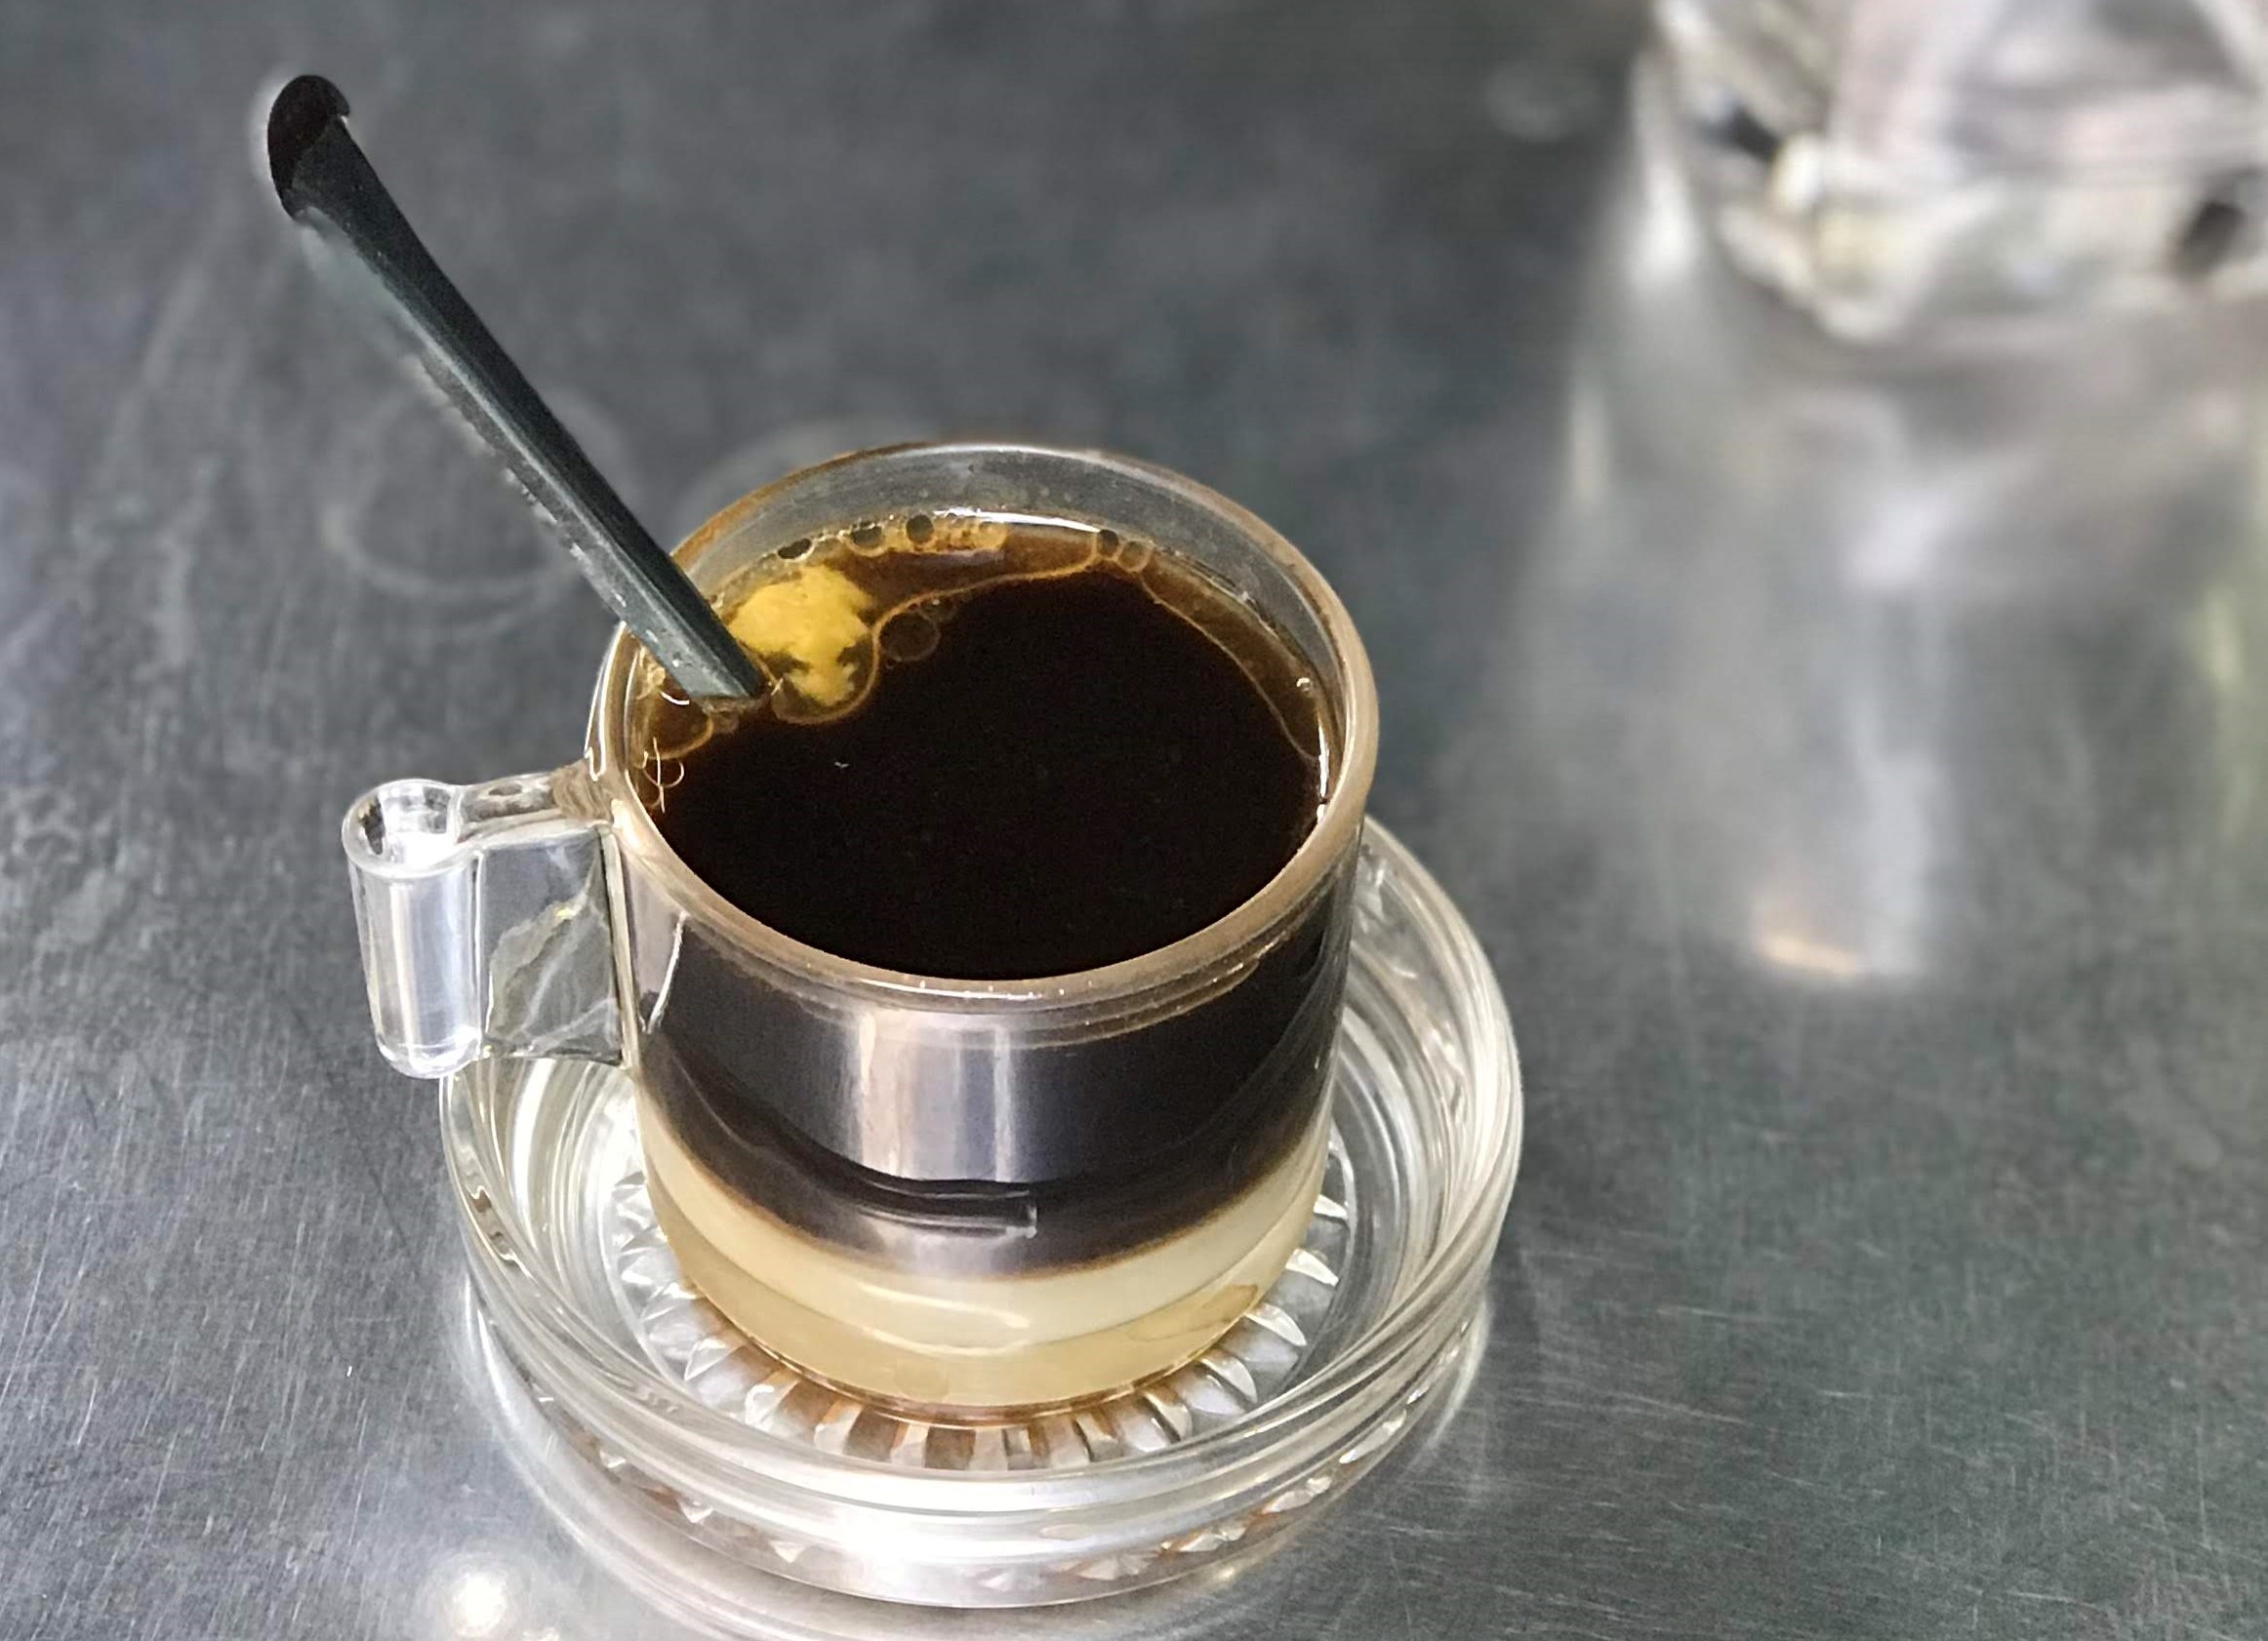 Ho Chi Minh City among world’s most endorsed destinations for coffee: Booking.com